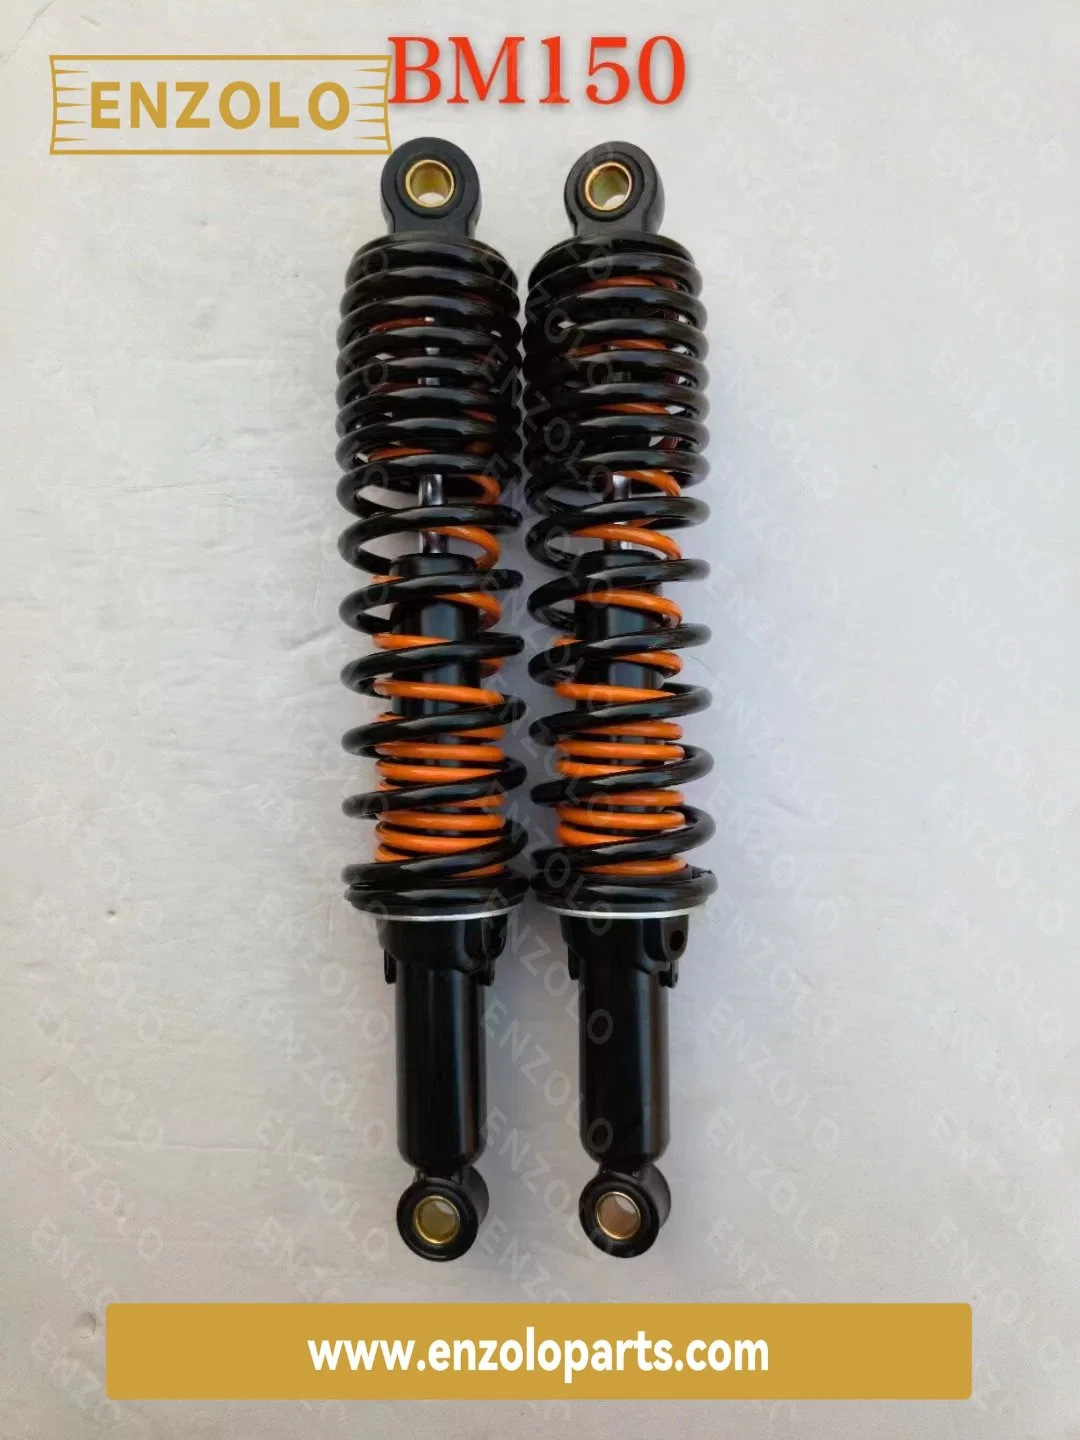 Wholesale/Supplier Cg125 Motorcycle Spare Parts Motorcycle Rear Shock Absorber